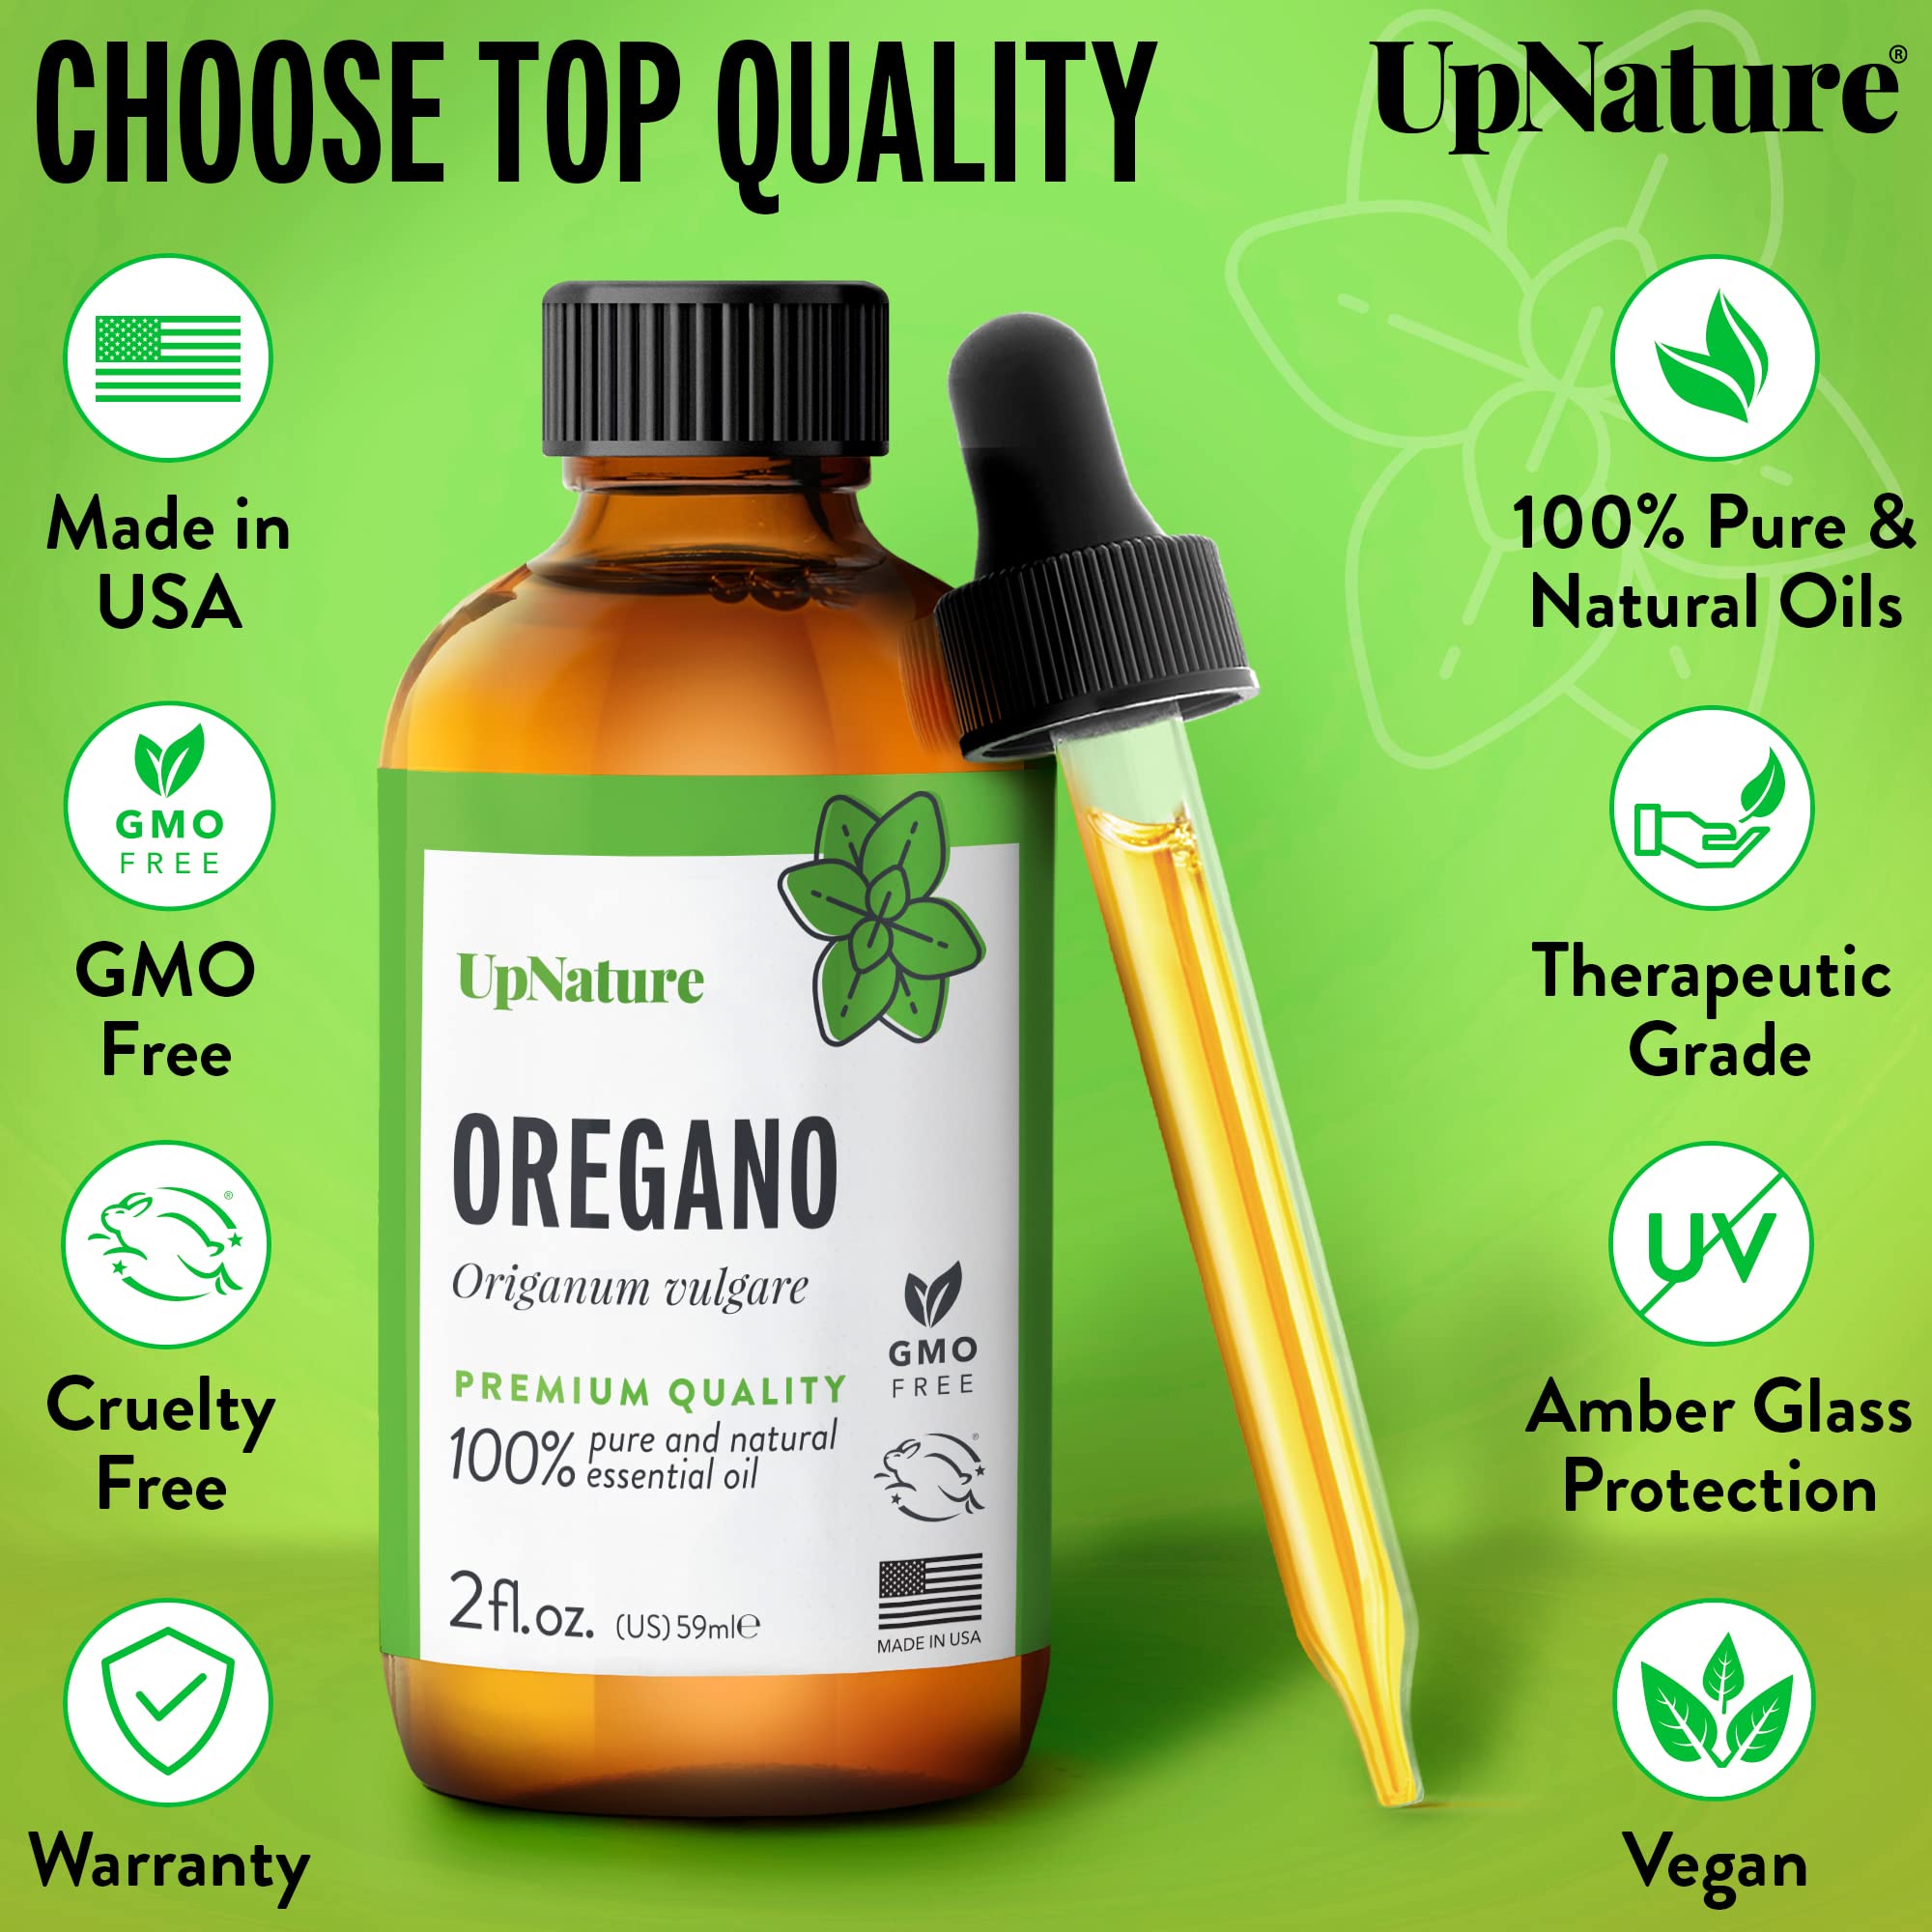 UpNature Oregano Essential Oil - 100% Natural & Pure, Undiluted, Premium Quality Aromatherapy Oil of Oregano Liquid - Supports Healthy System & Nails, Digestion & Respiratory Relief, 2oz